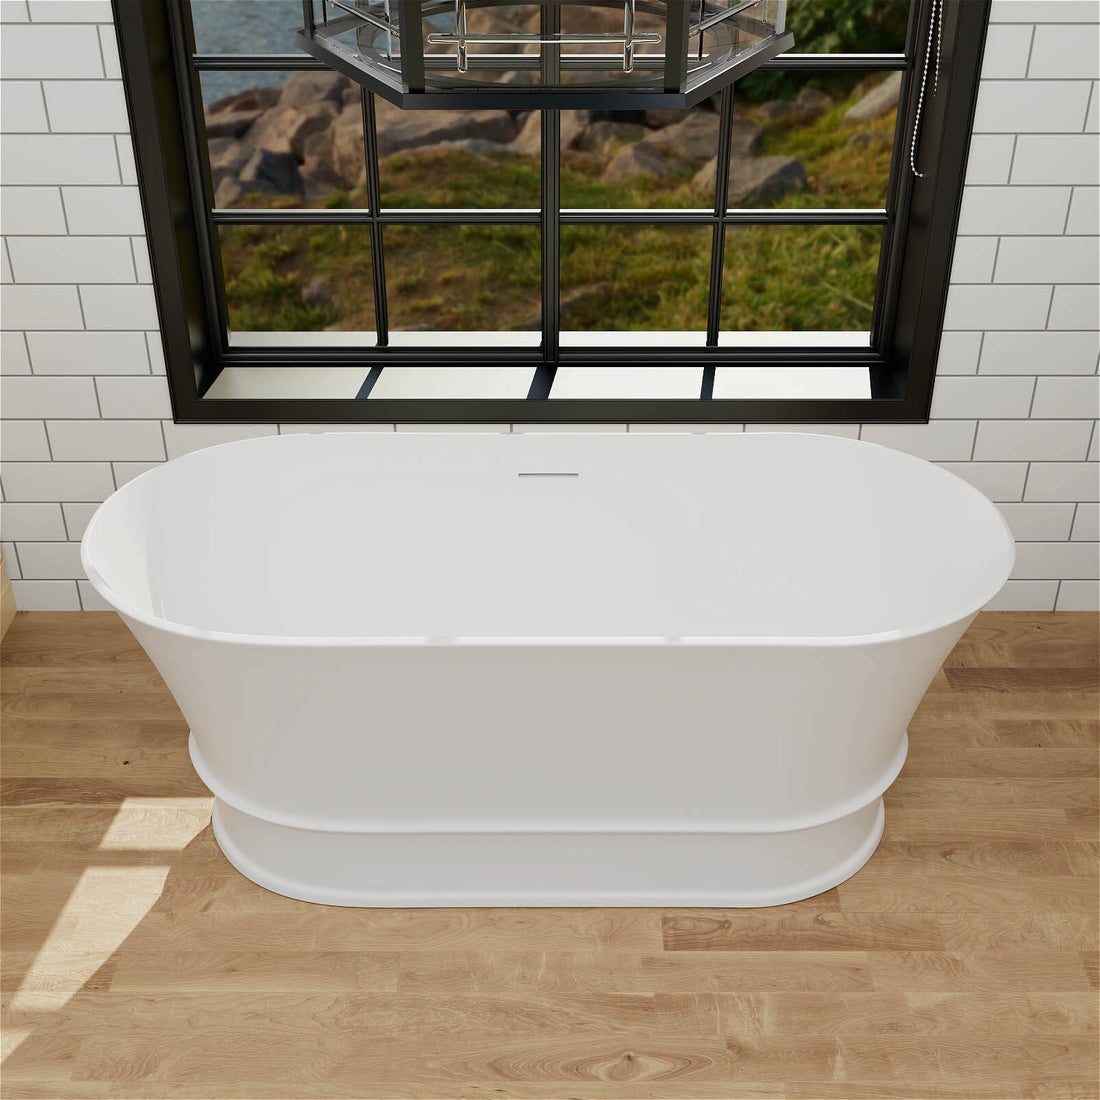 59 inch Vintage Solid Surface Stone Tub